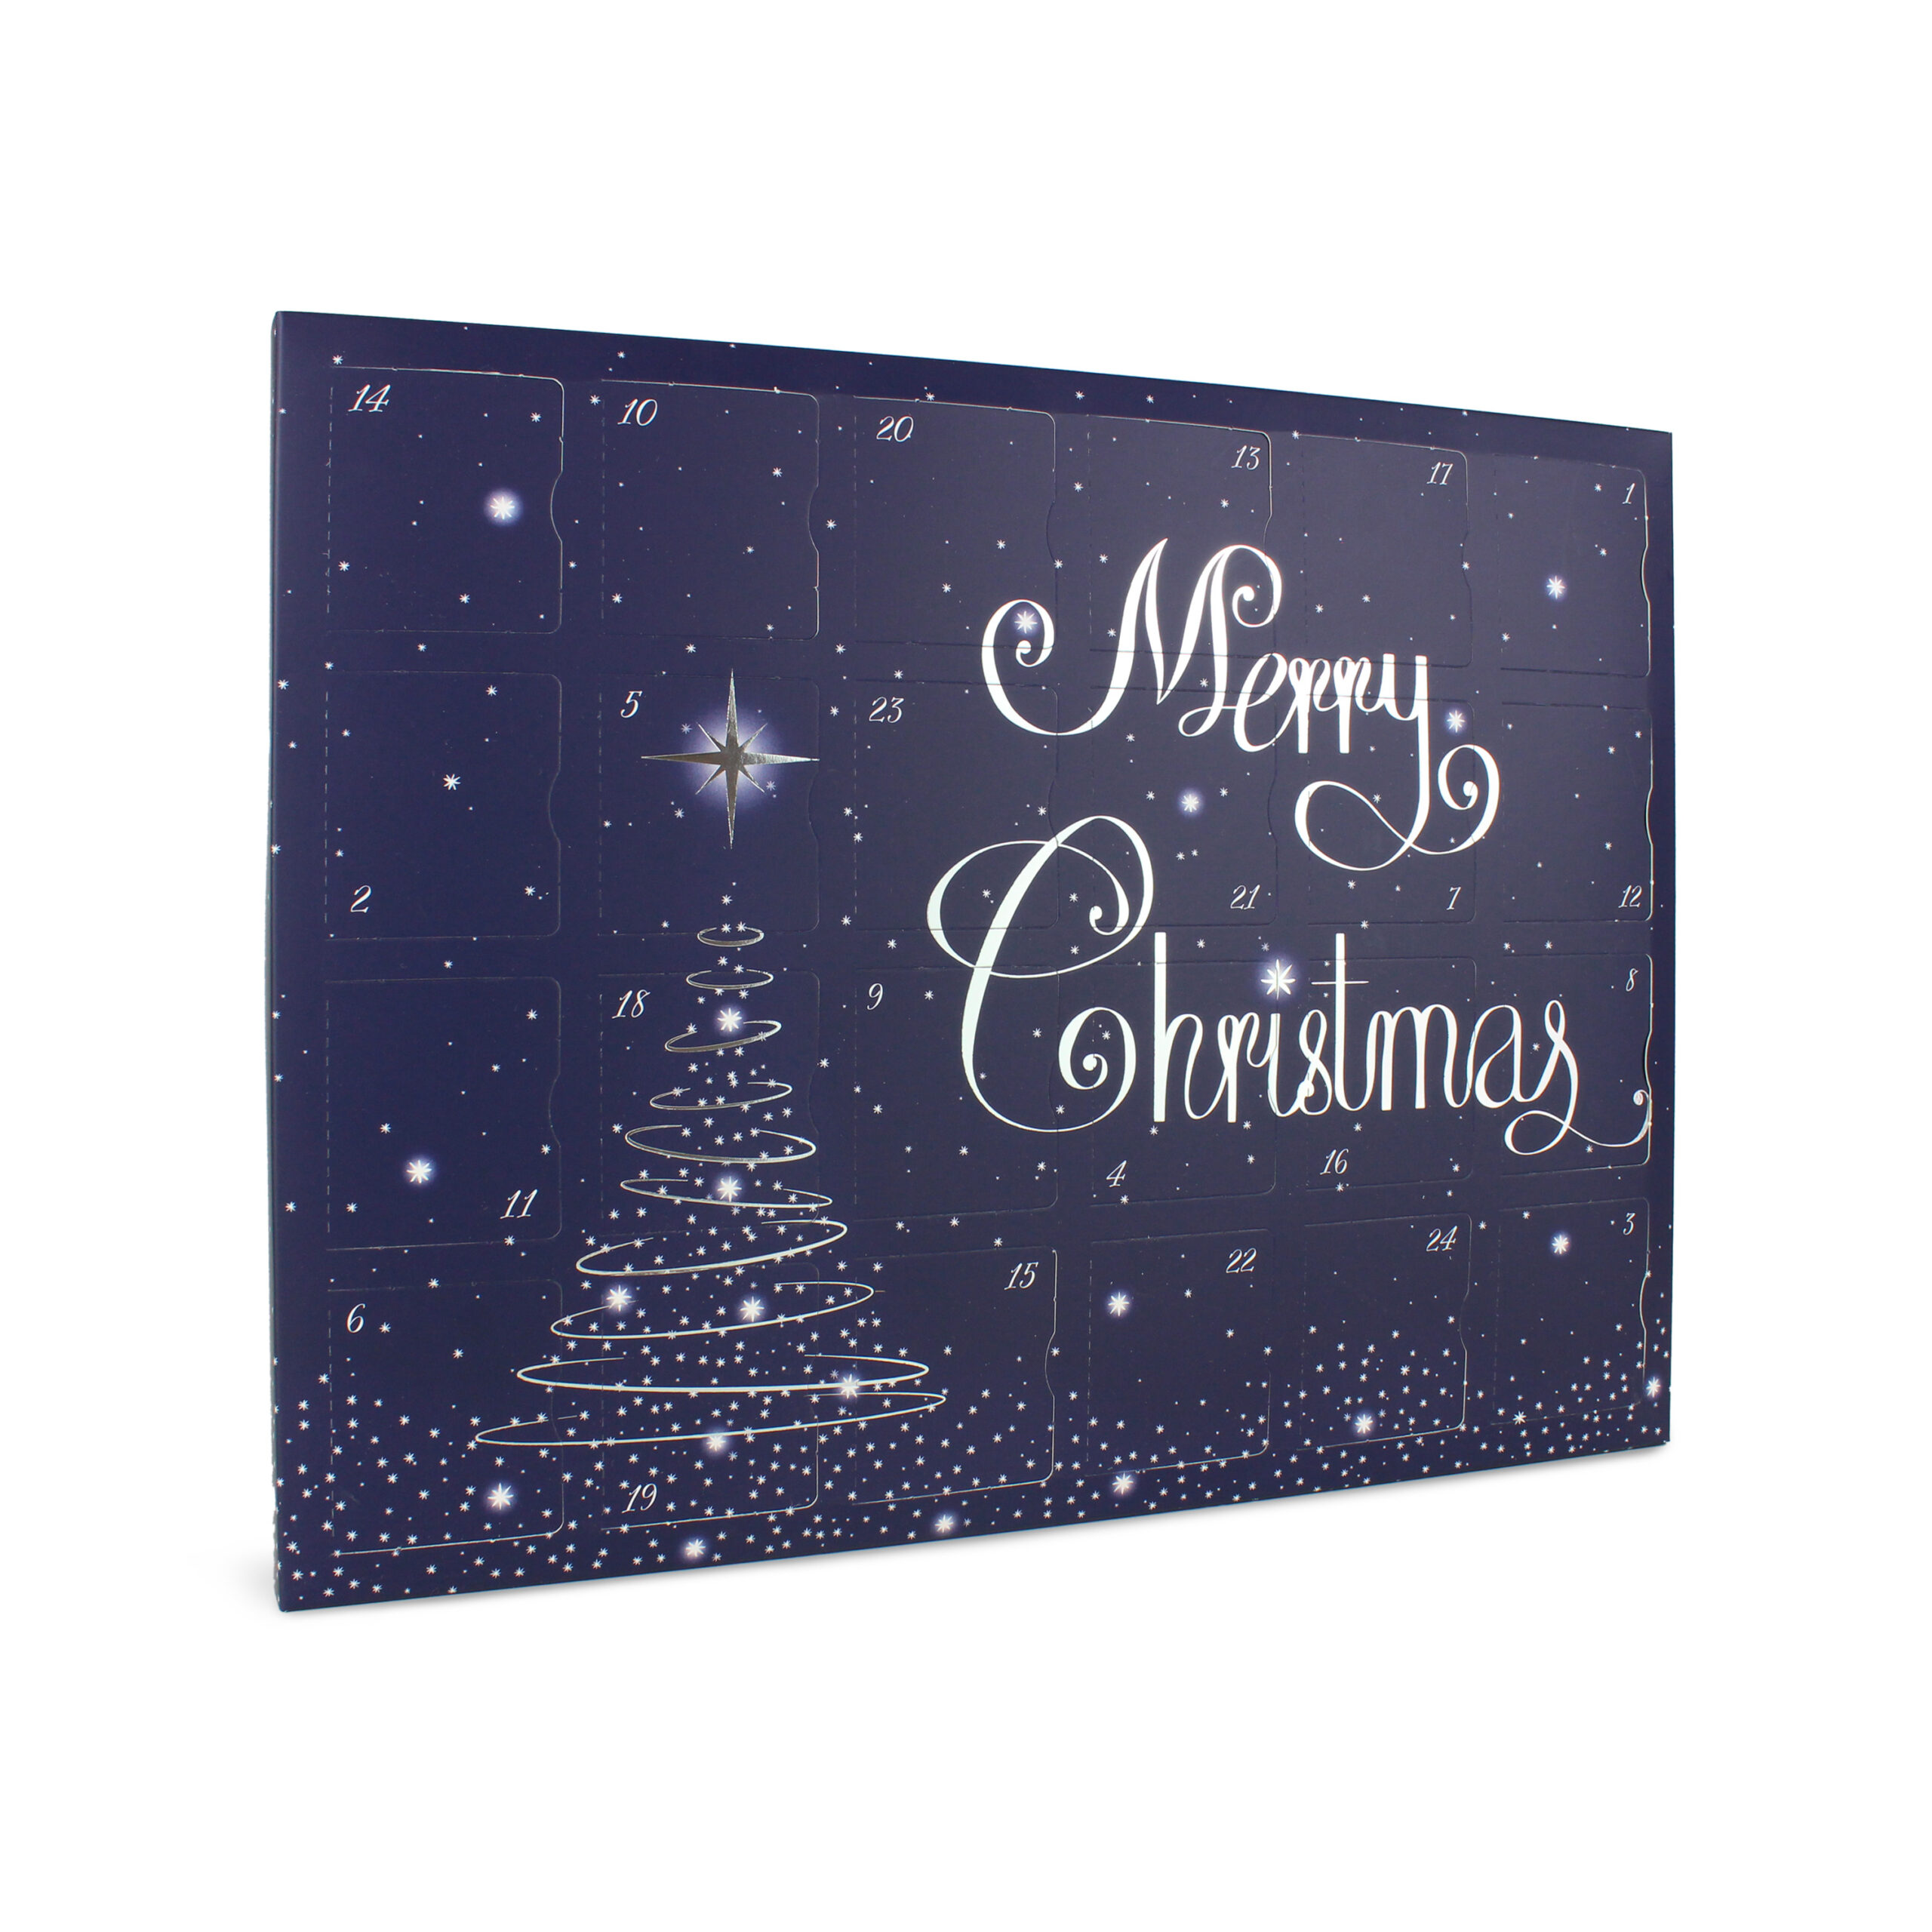 24 Day Giant Landscape Night Sky Advent Calendar with bright sliver foil detailing. Scripted Merry Christmas, festive tree and twinkling stars